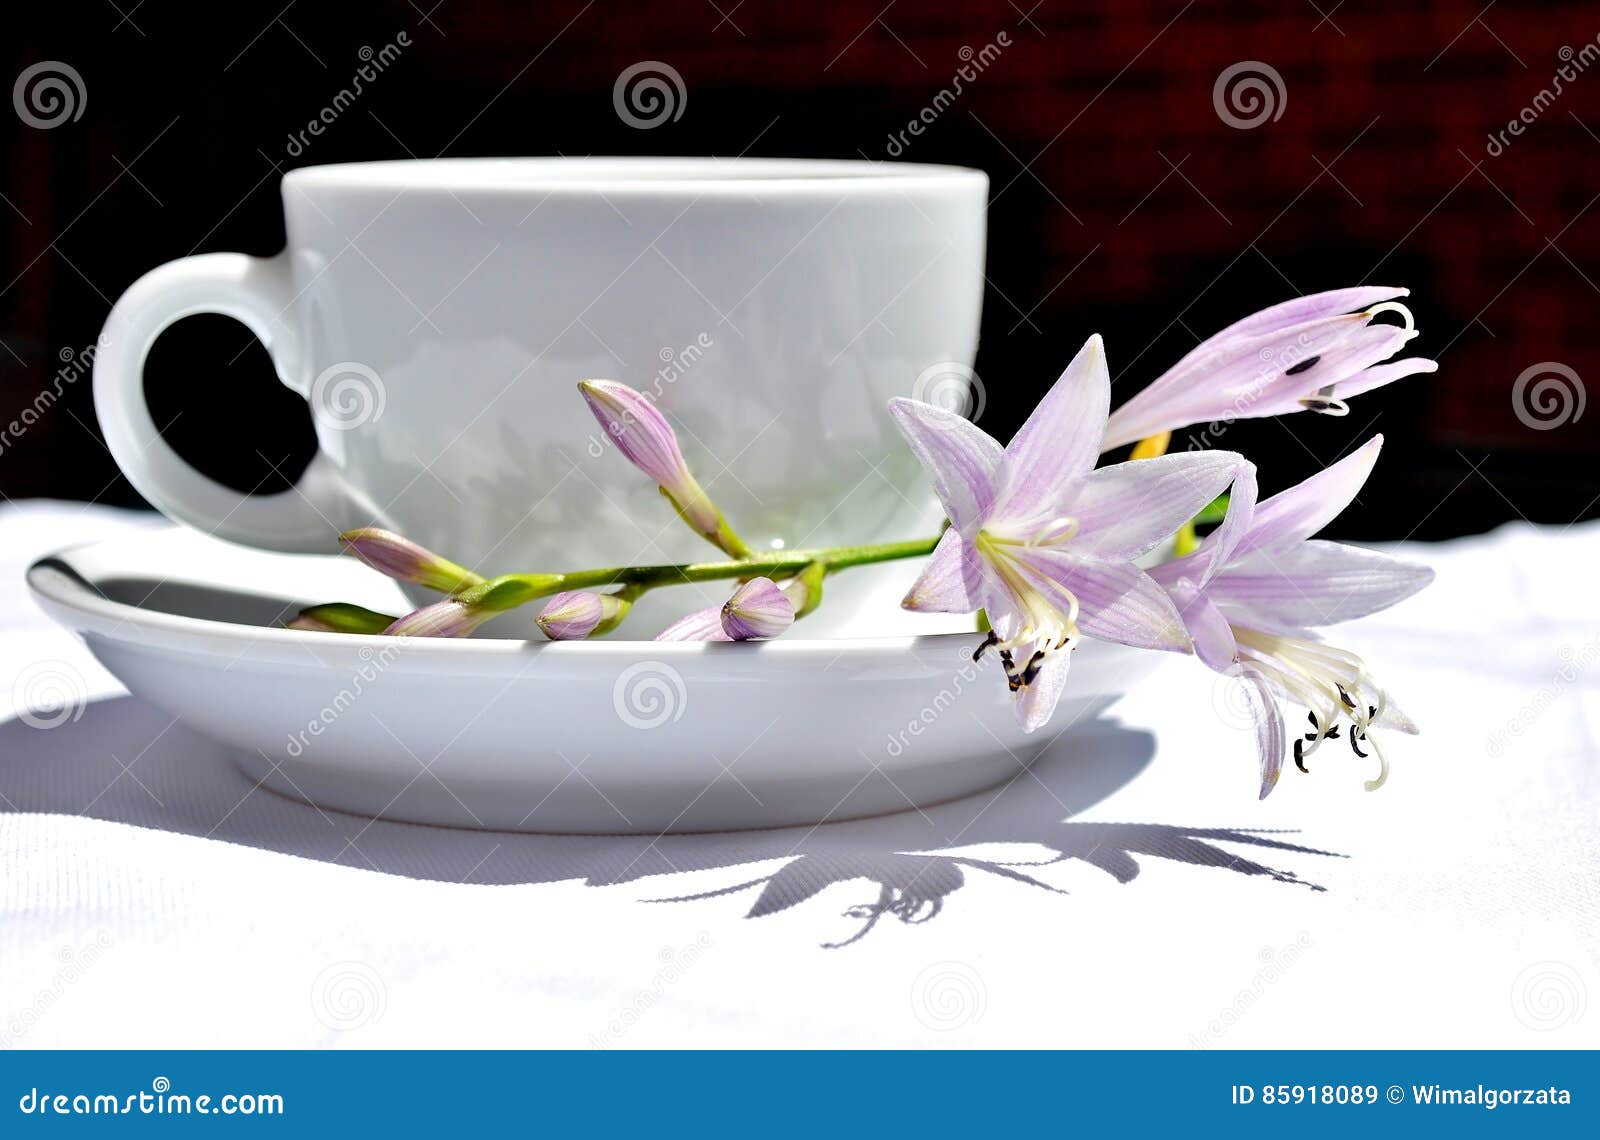 coffee cup and flowers.